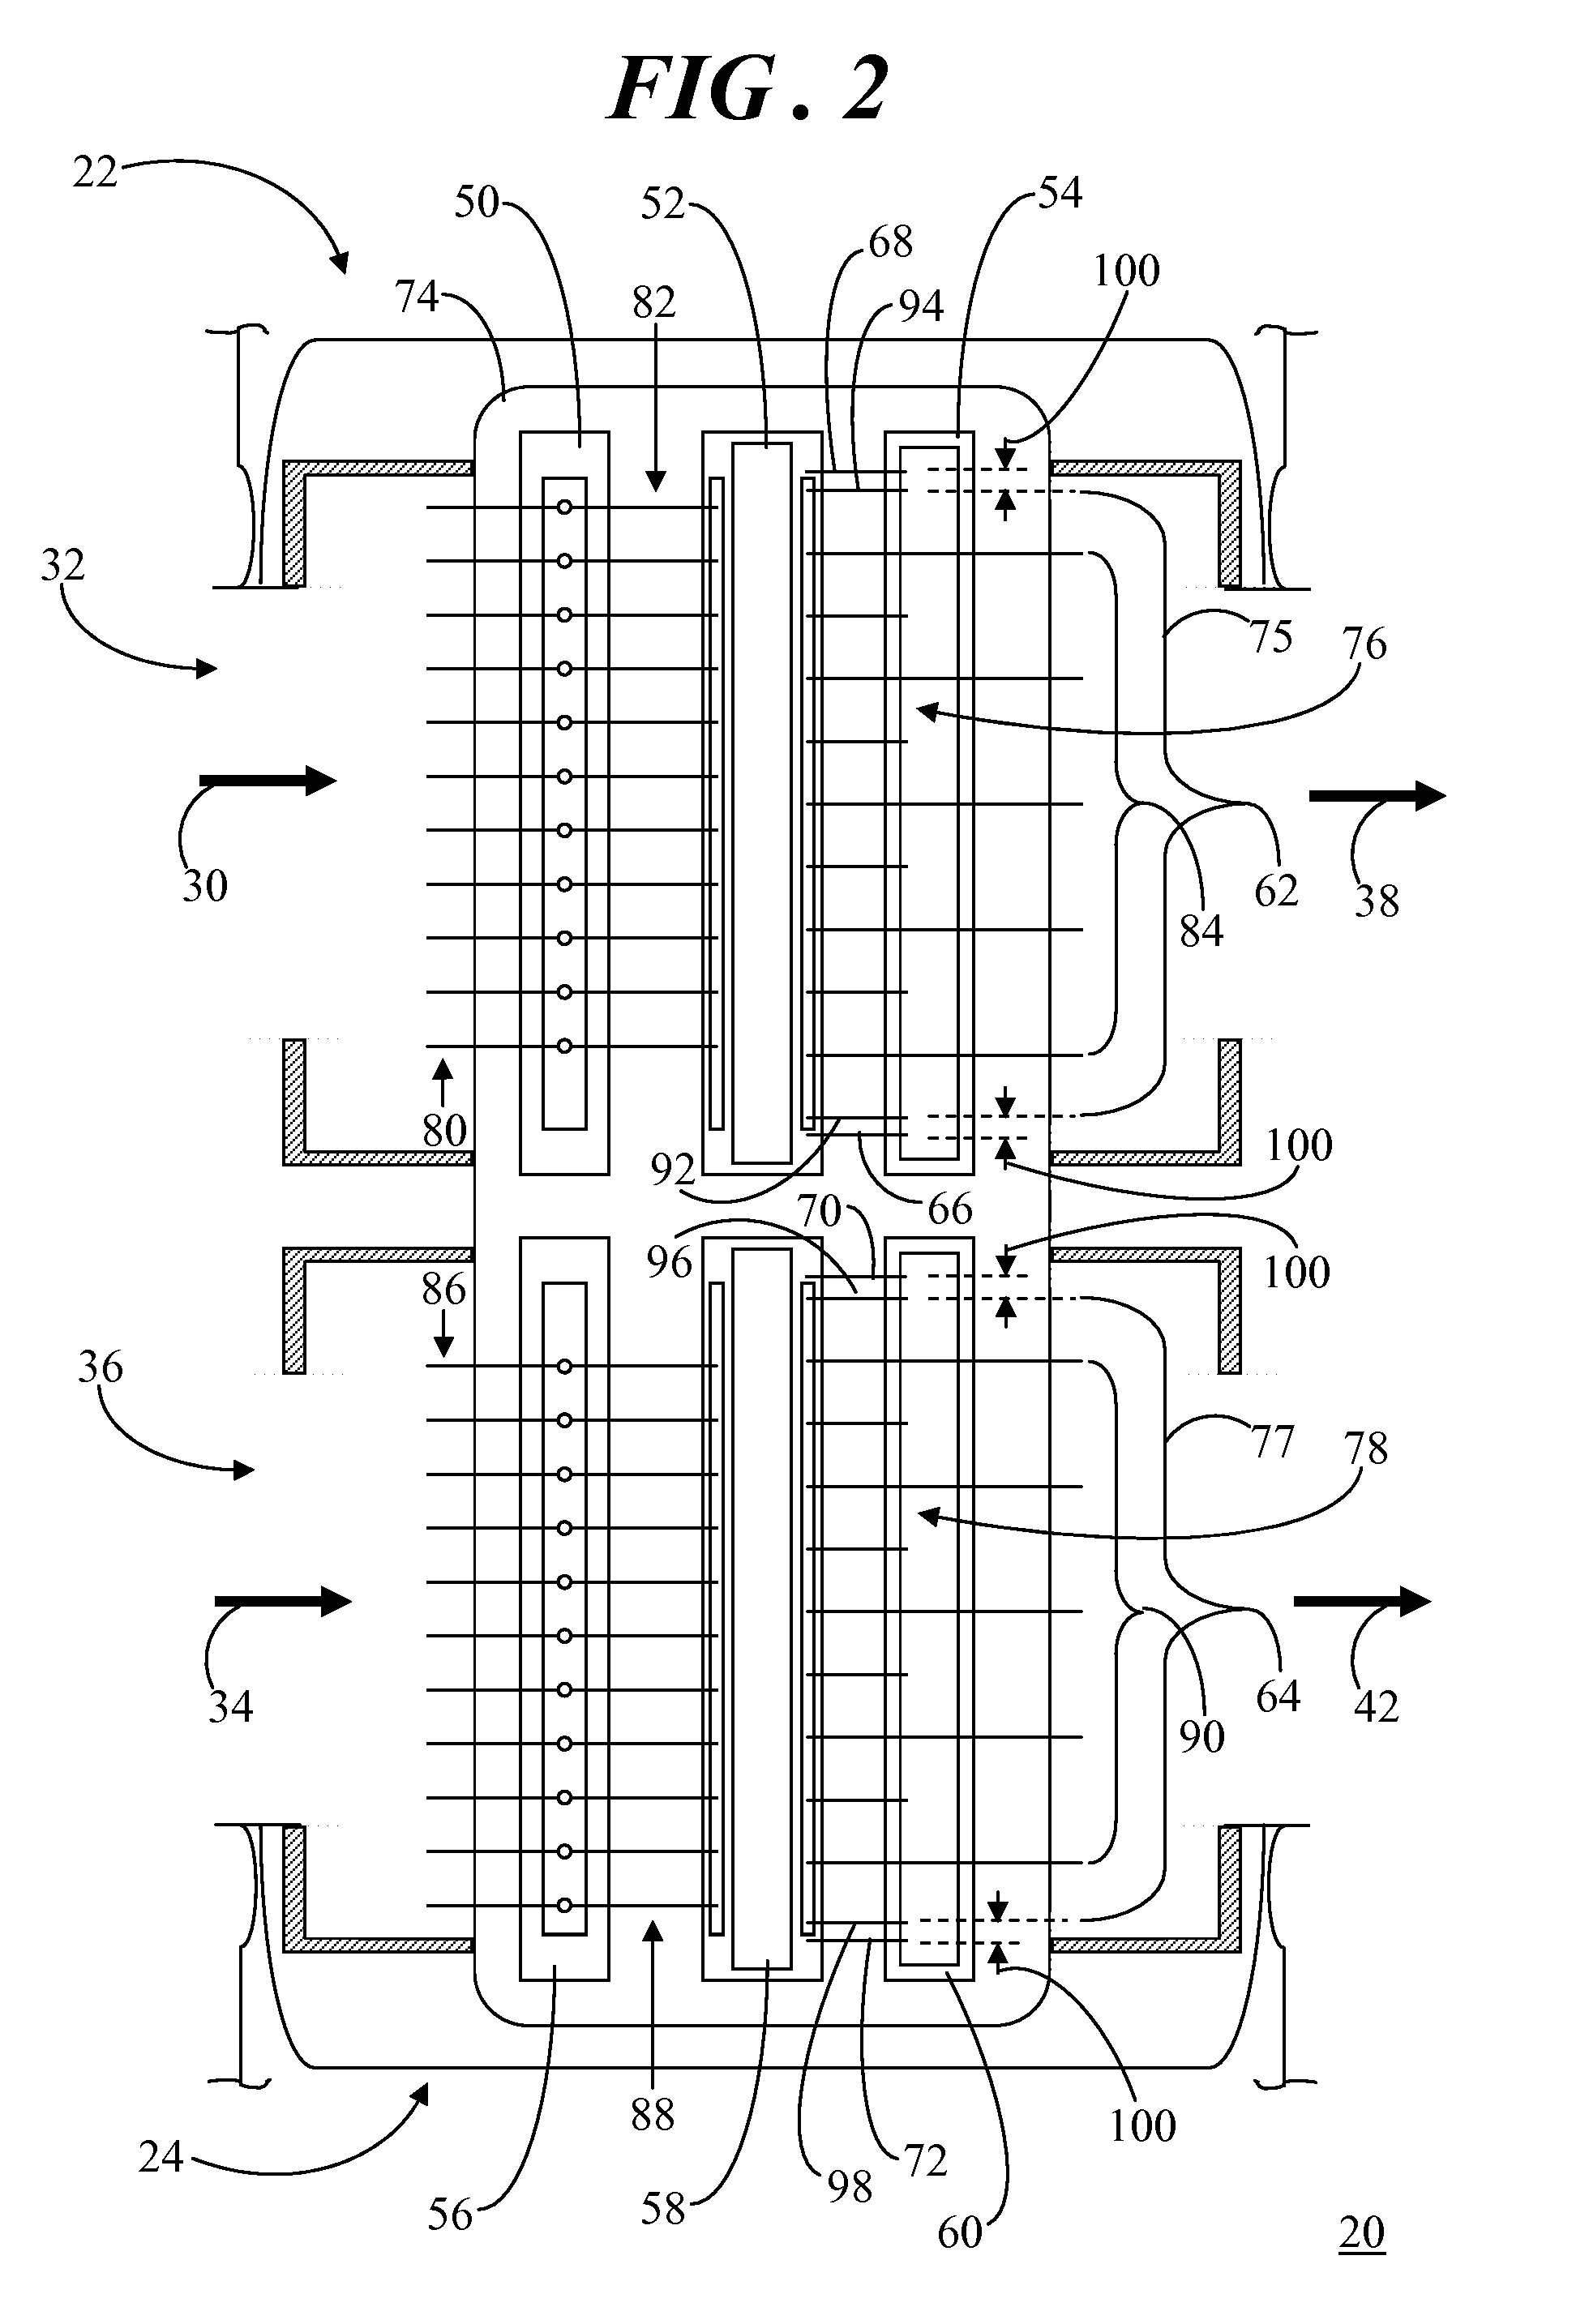 Semiconductor package with reduced inductive coupling between adjacent bondwire arrays